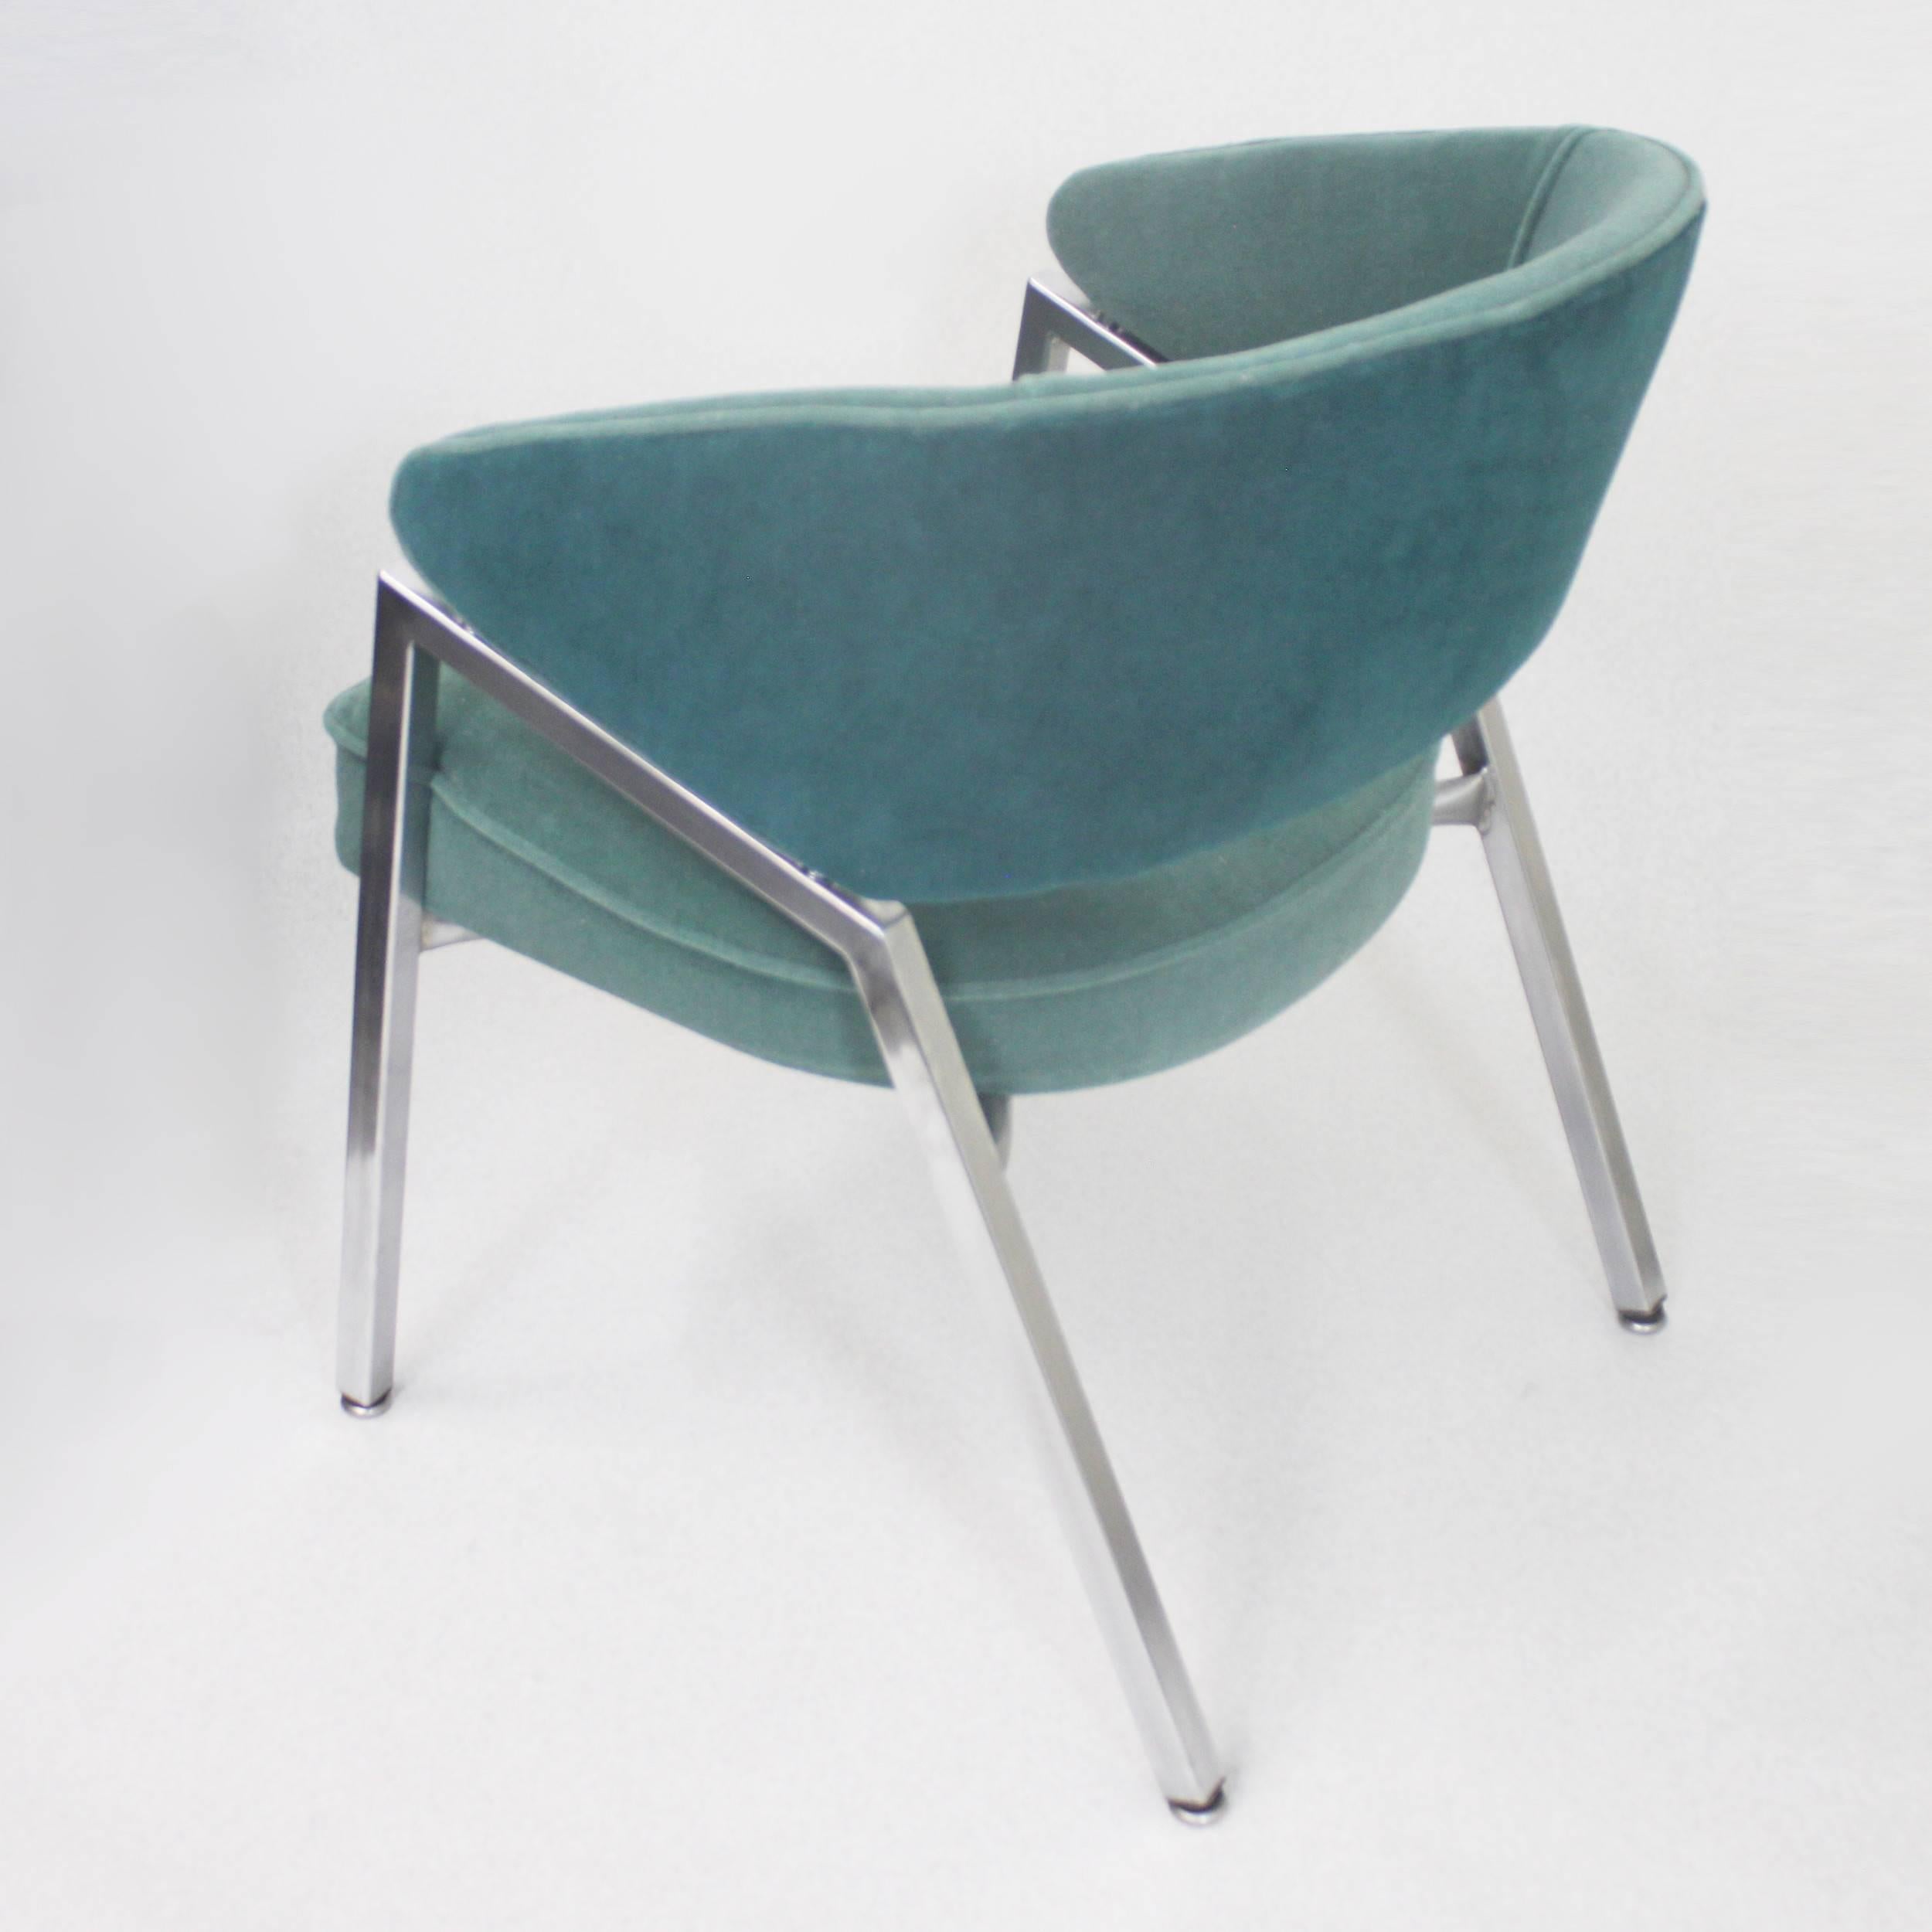 Upholstery Rare Pair of 1970s Mid-Century Modern Teal Green and Chrome Side Arm Chairs